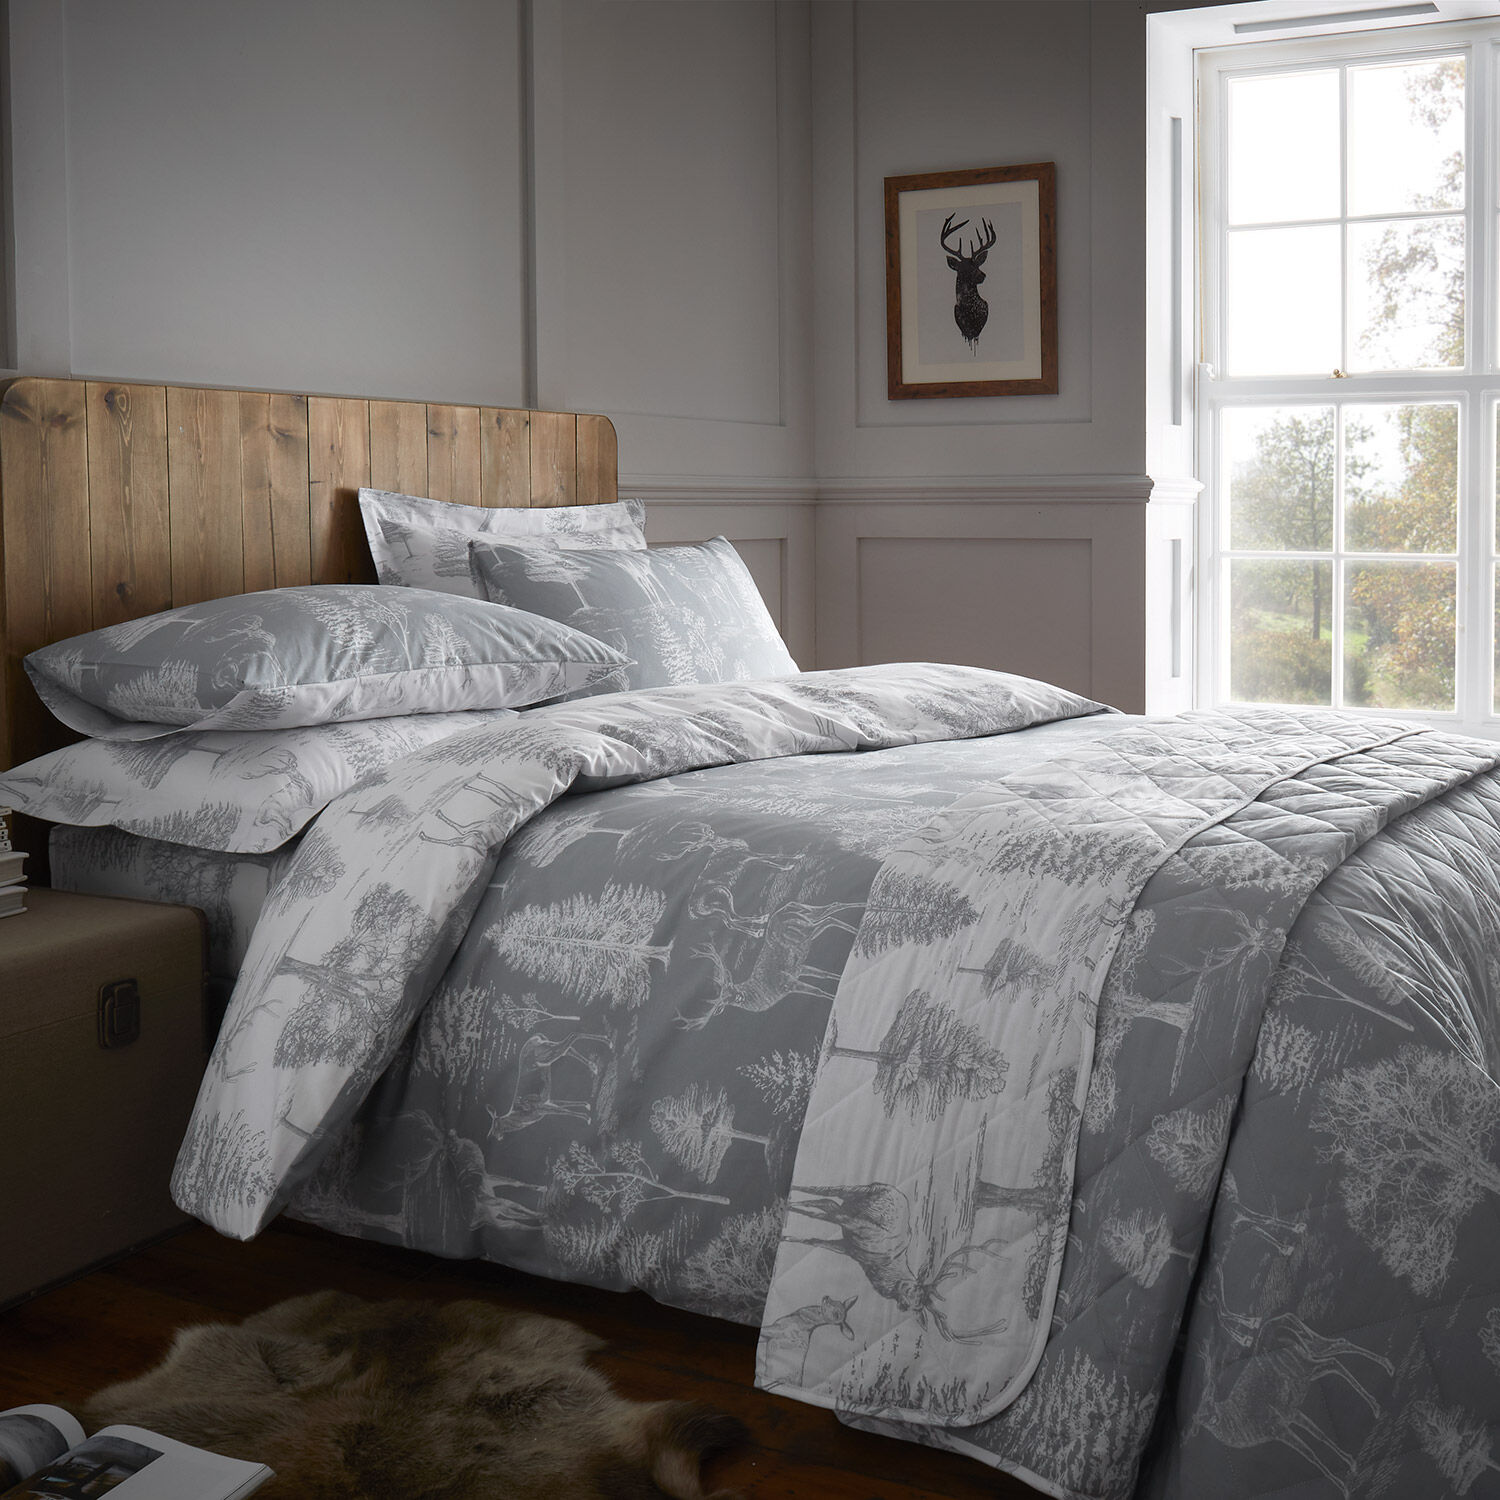 Stag Toile Bed Linen Home More, Brown Toile Duvet Cover